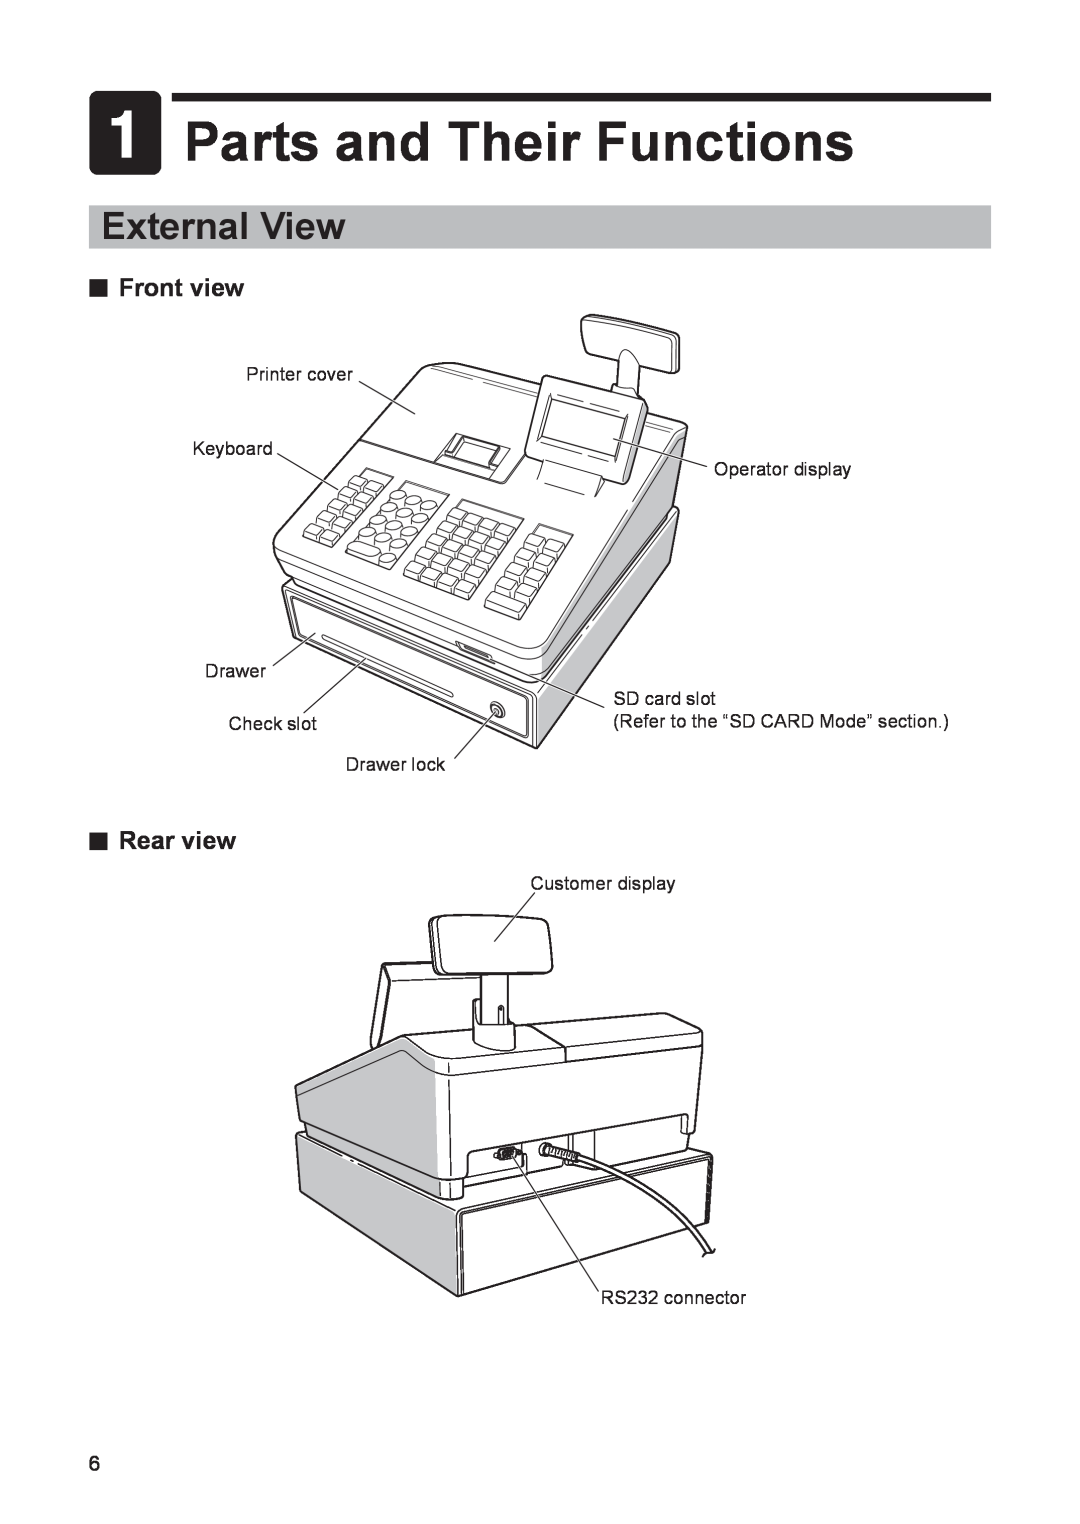 Sharp electonic cash register instruction manual Parts and Their Functions, External View, Front view, Rear view 